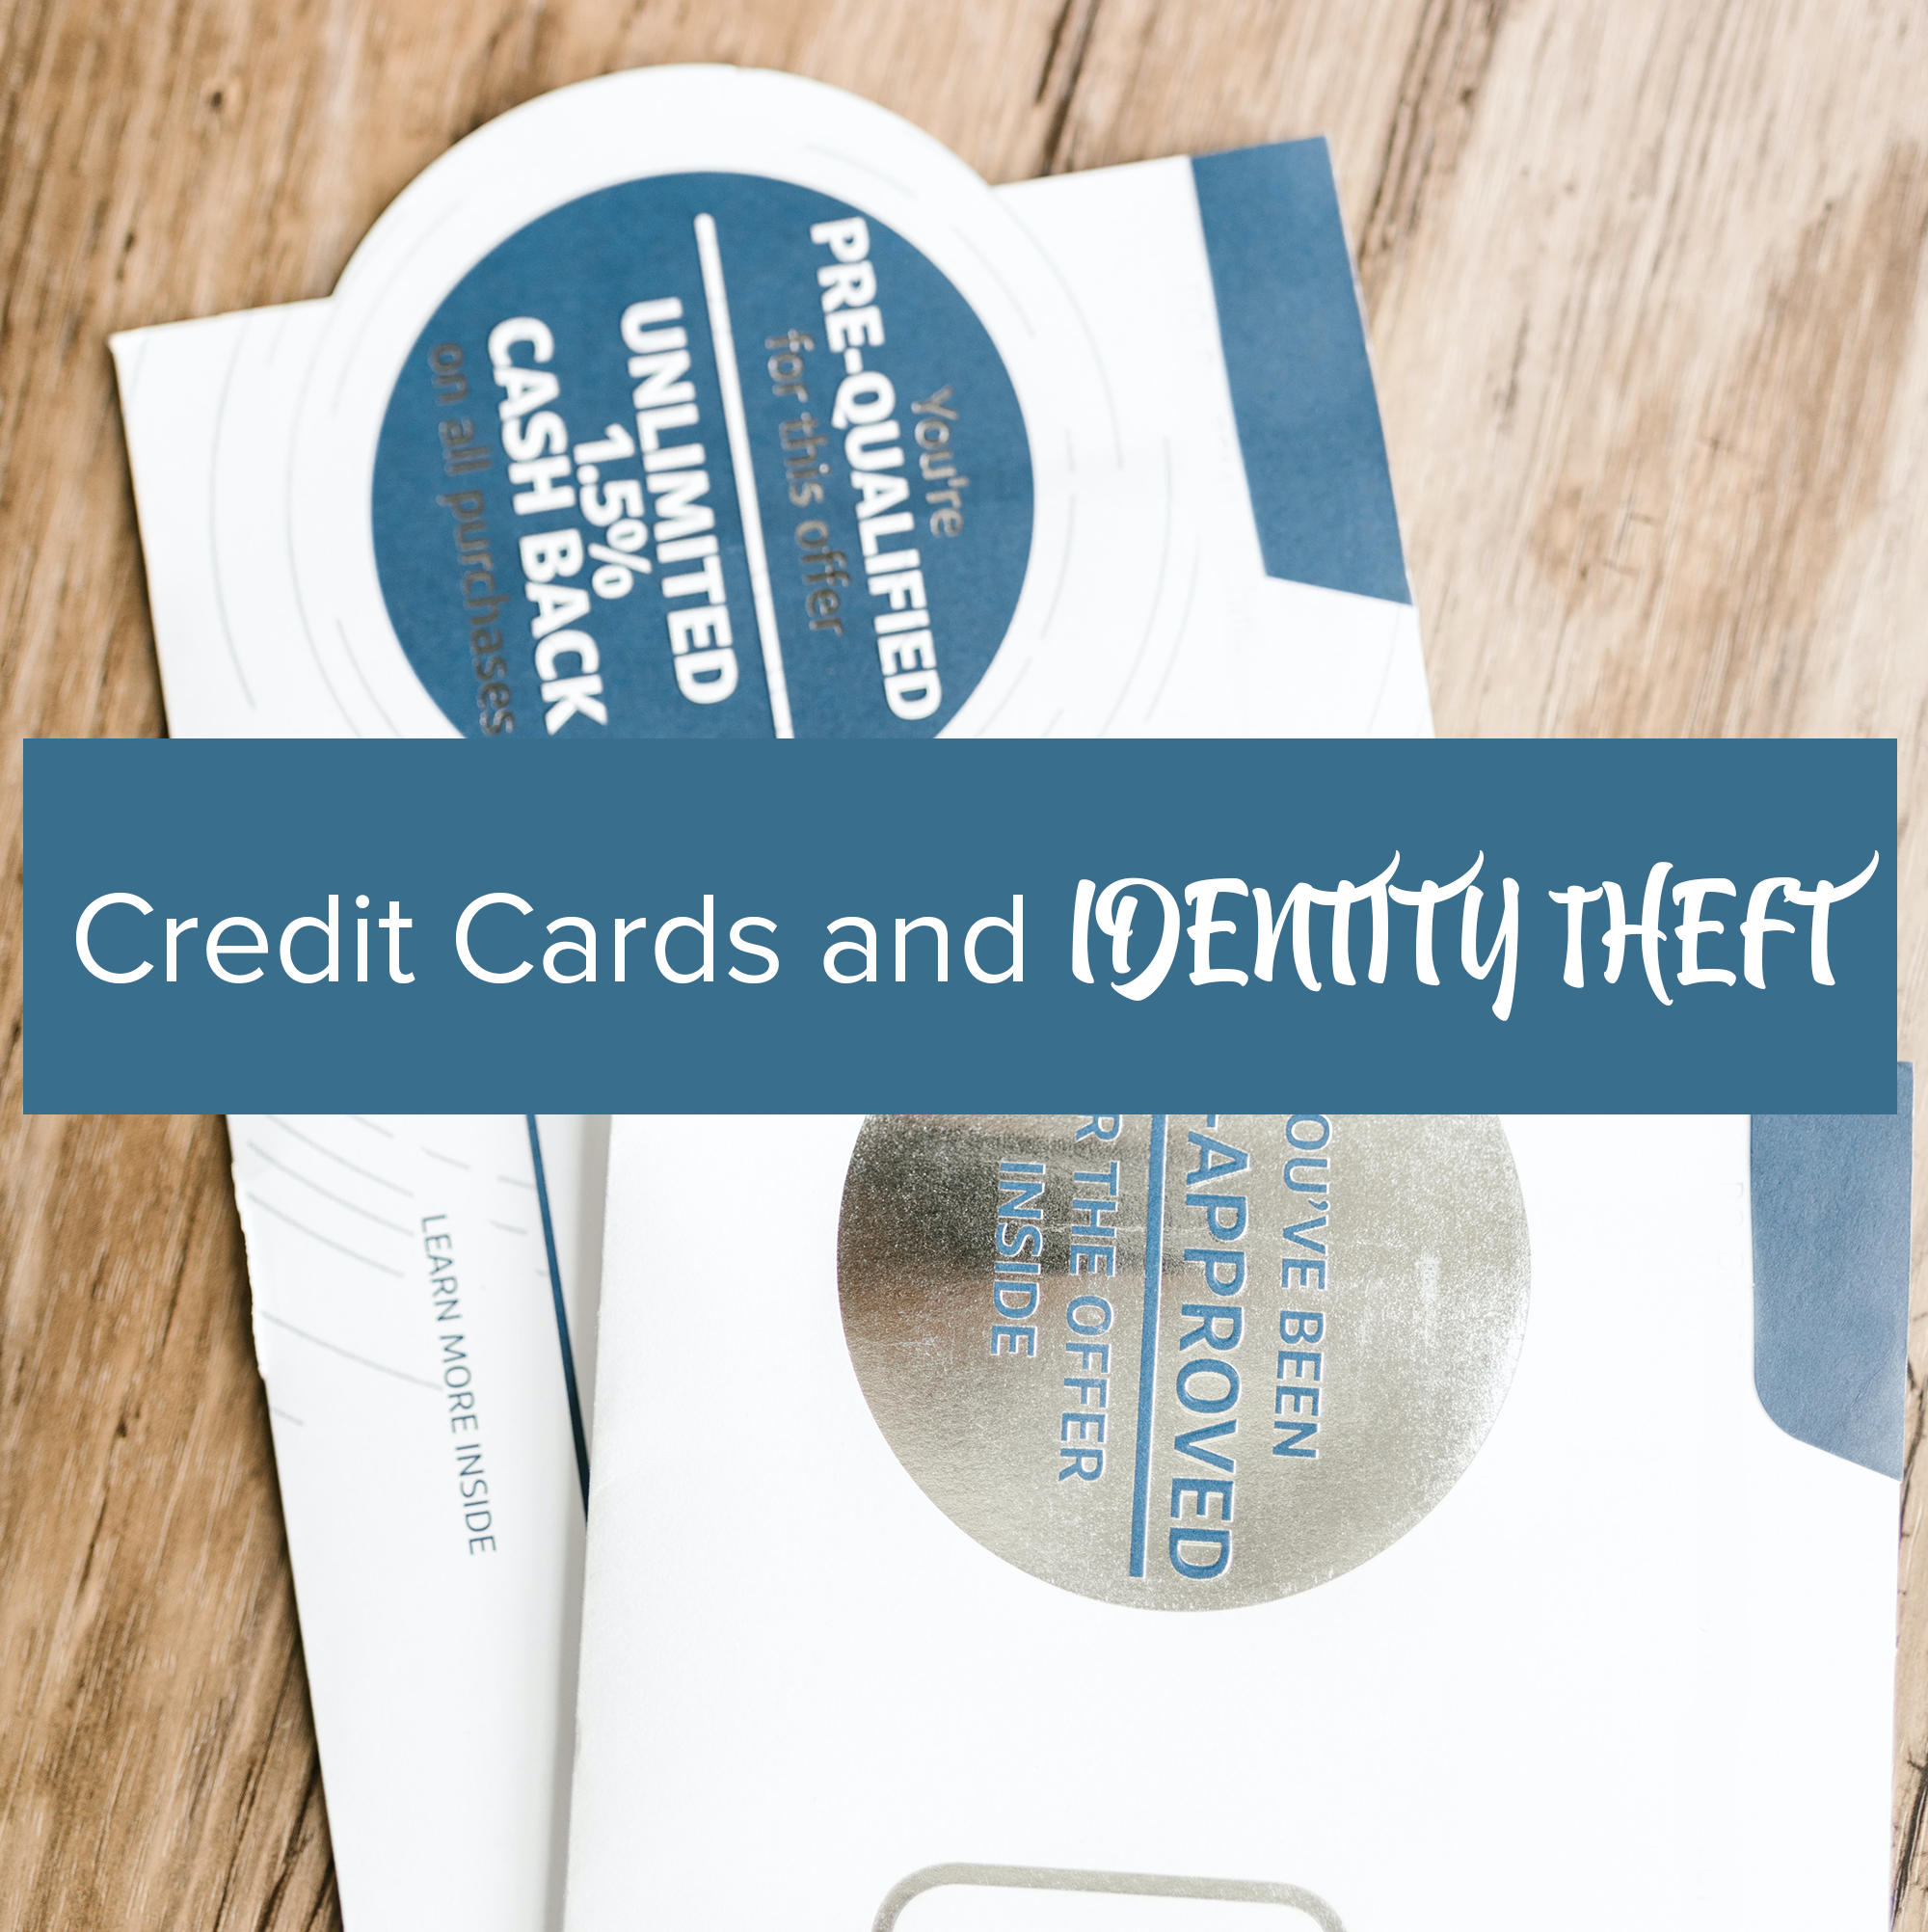 Credit cards and identity theft